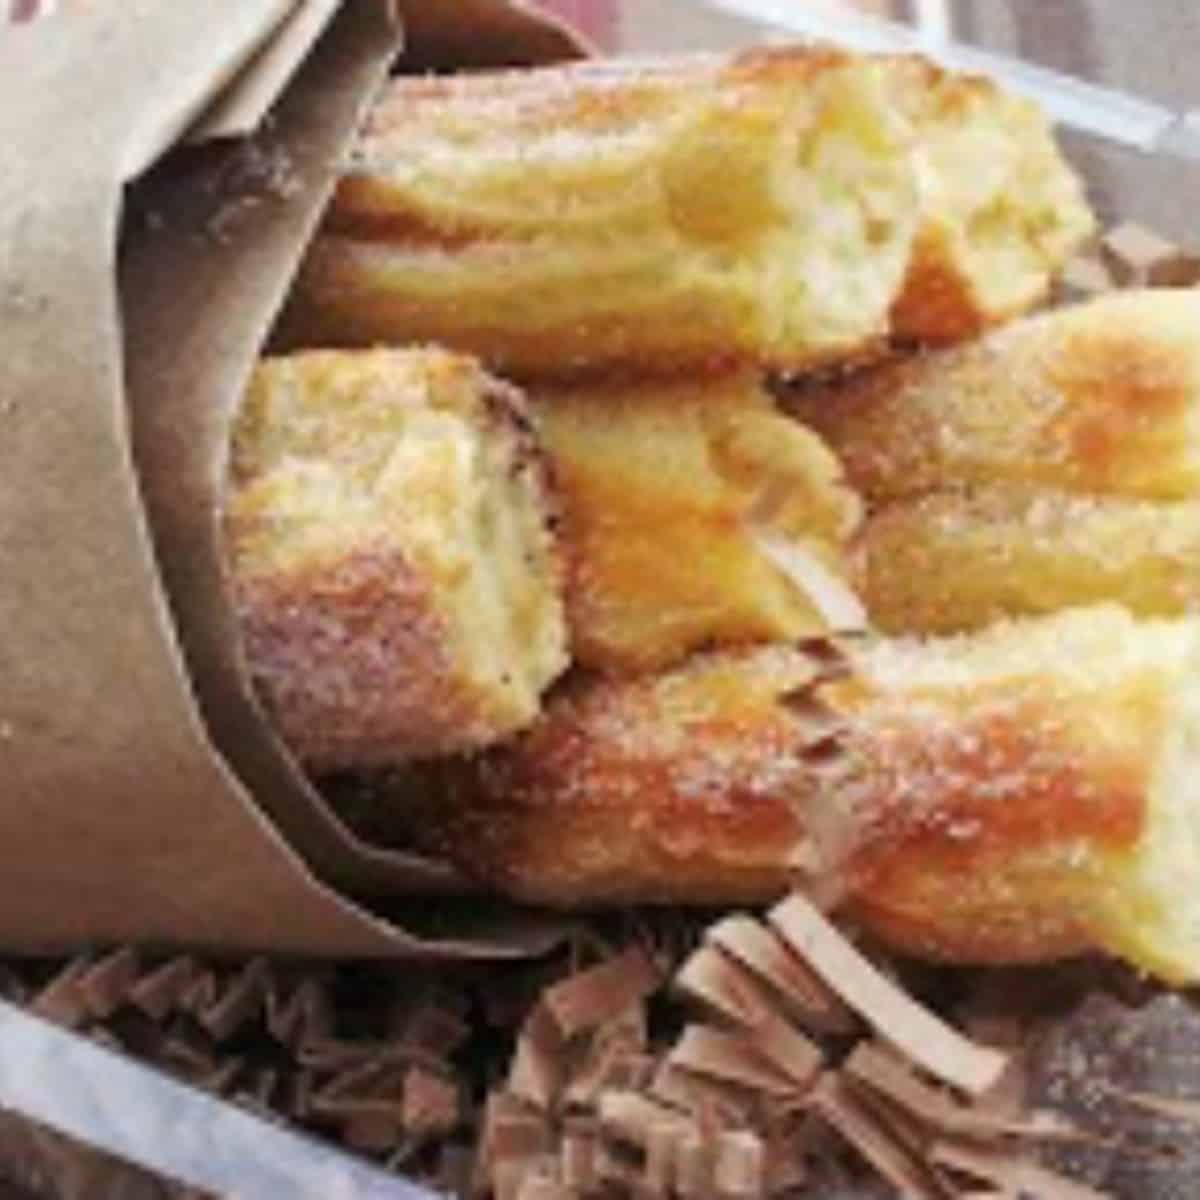 oven churros have a crisp exterior and light and airy interior . they are coated in a cinnamon sugar mixture and wrapped in brown parchment paper. 